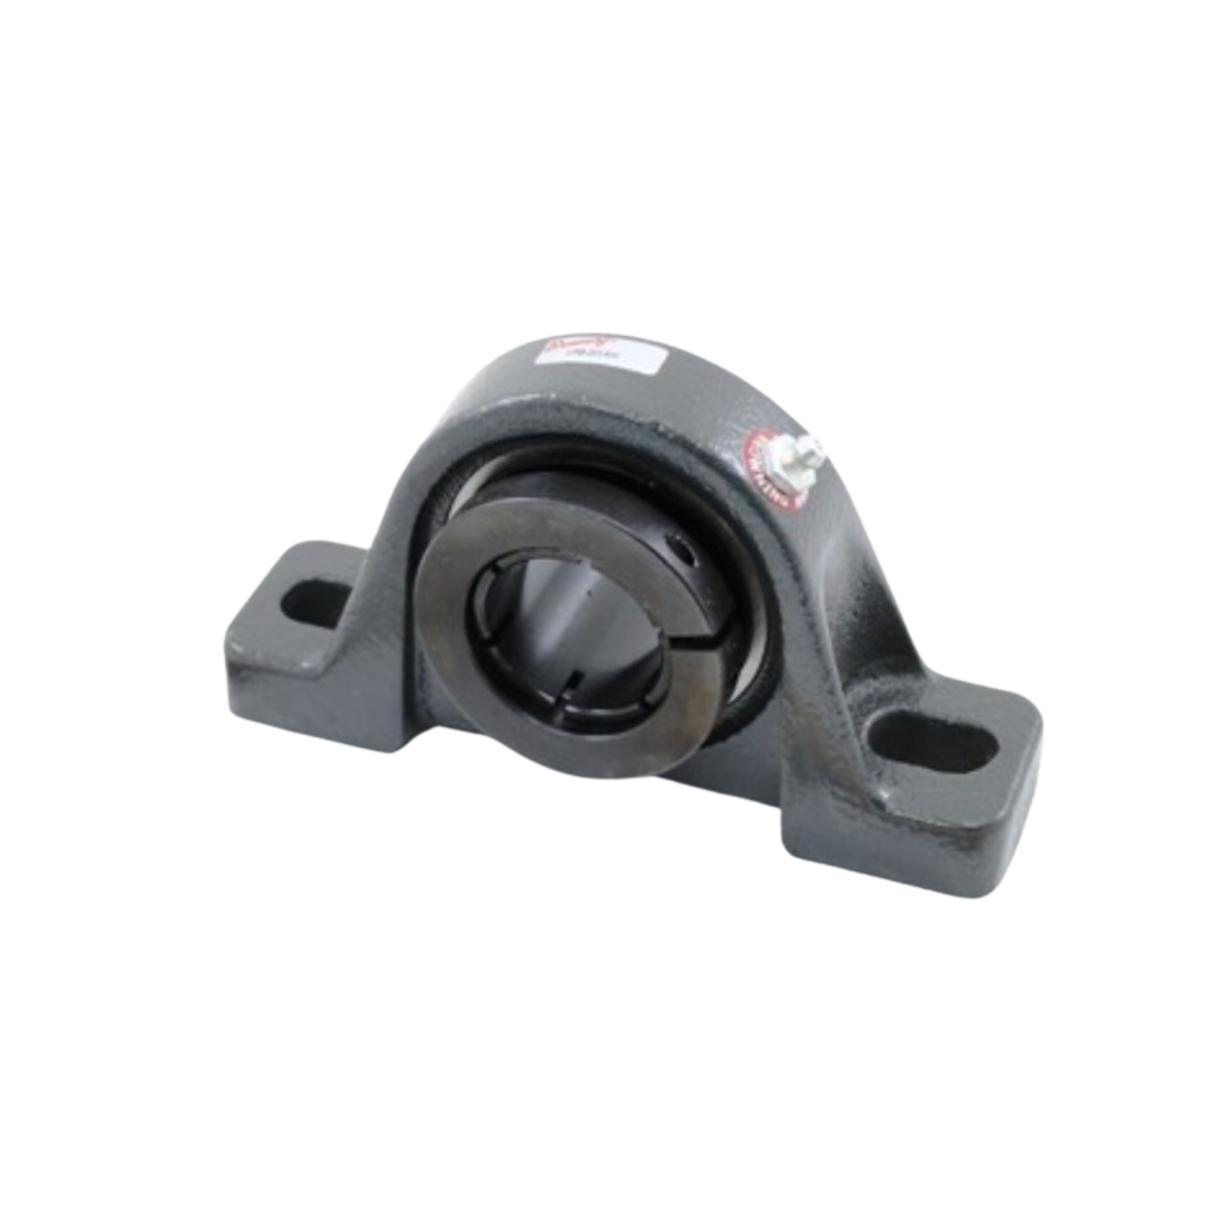 Browning VPB-223 AH 1 7/16" Bore Diameter, Standard Duty Cast Iron Pillow Block, 5782 lbf Load Capacity, Mounted Ball Bearing with BOA Concentric Locking and Contact and Flinger Seal for Air Handler Application